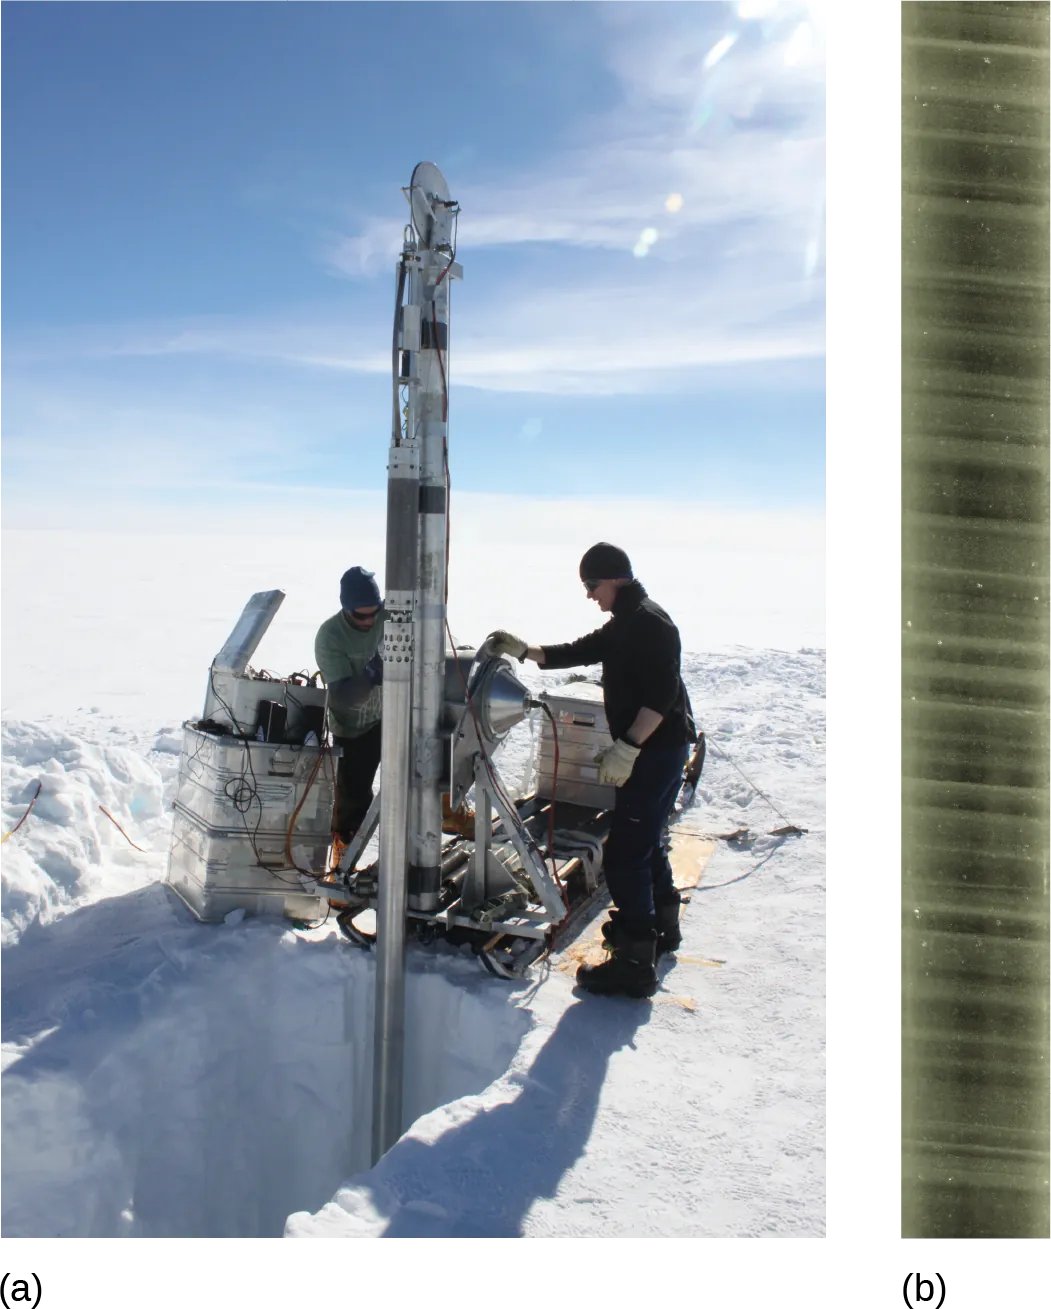 In the first image, a group of scientists uses a drill to extract an ice core in a polar environment. In the second, an ice core is displayed, showing air bubbles trapped within.